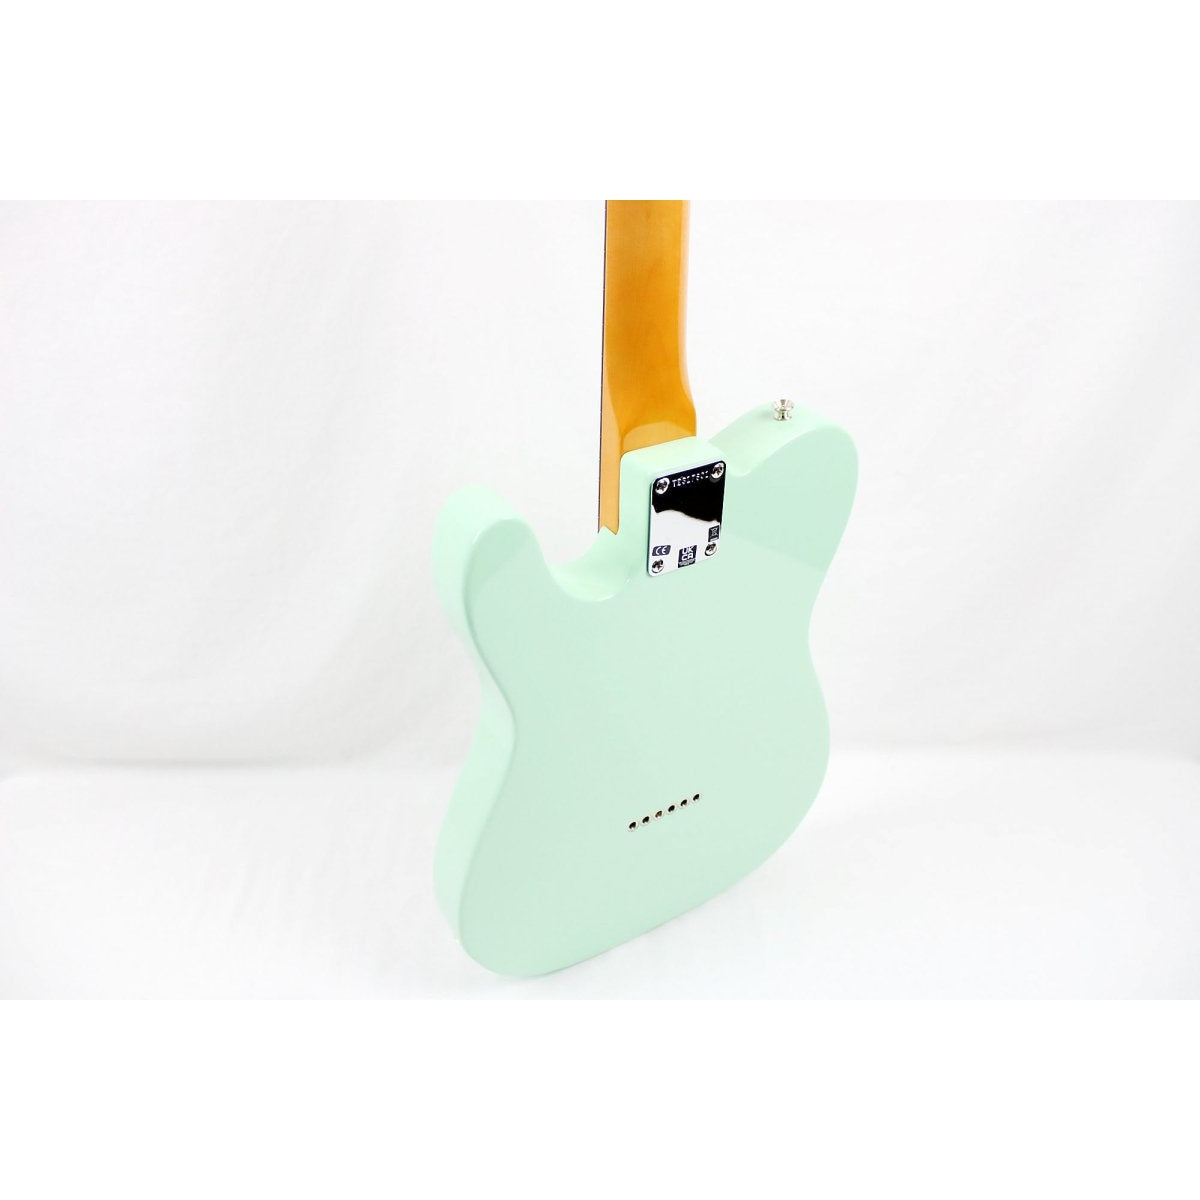 Fender American Vintage II '63 Telecaster - Surf Green | with OHSC *USED* - Leitz Music-885978840878-V2317601